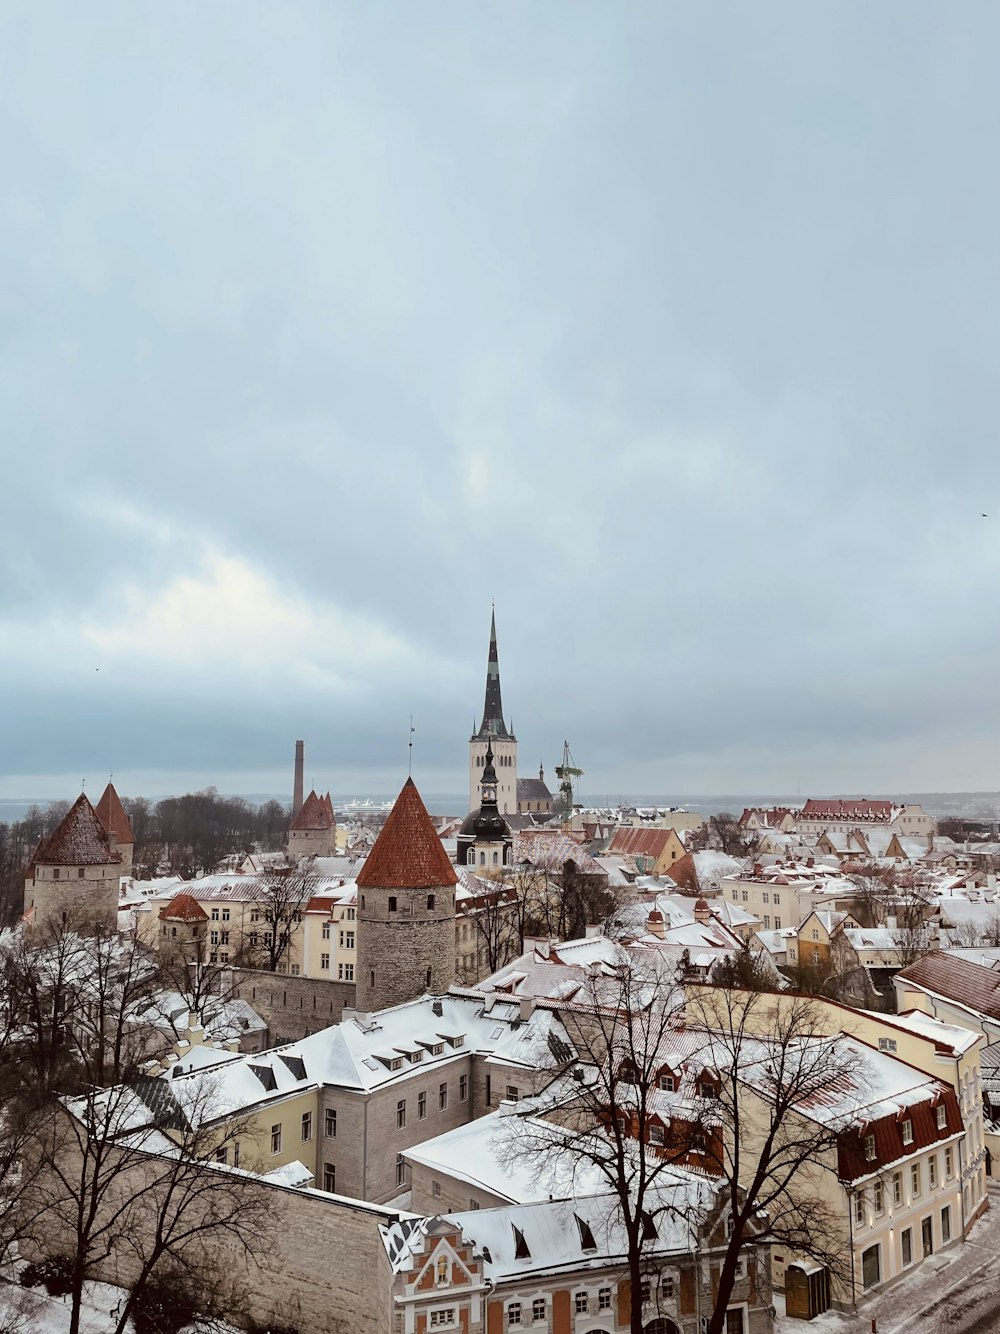 a view of a snowy city with a church steeple